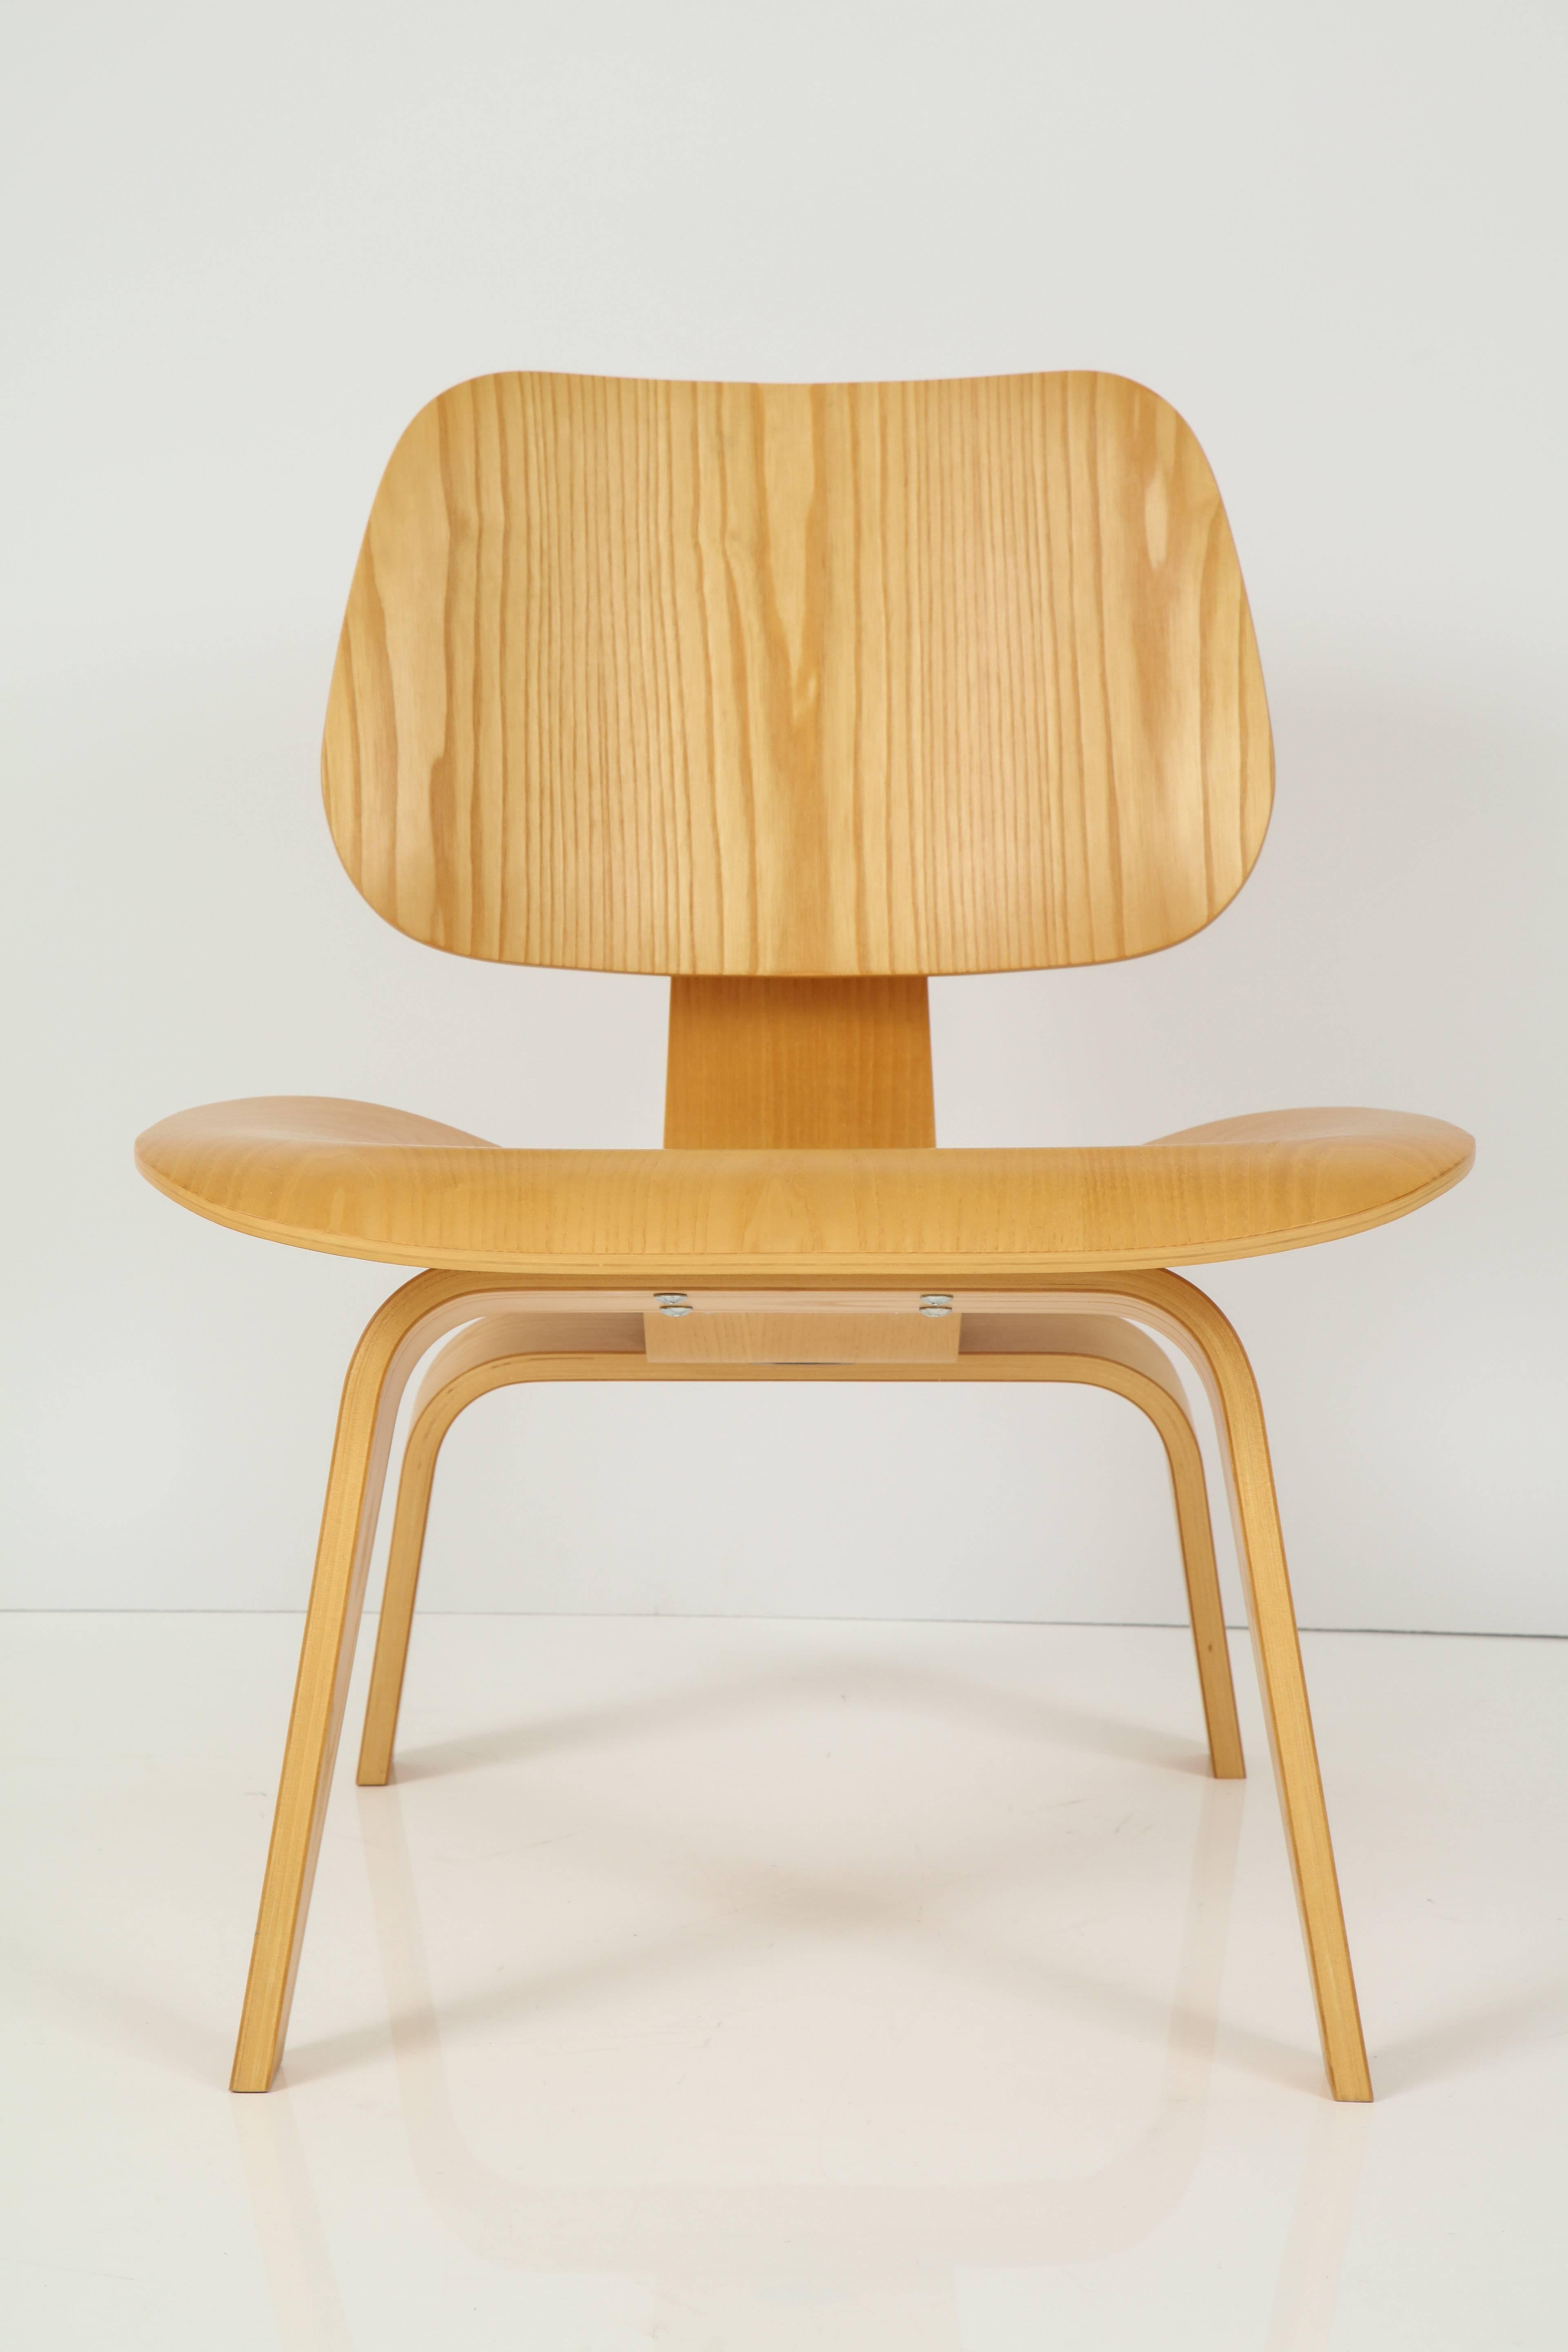 American LCW by Charles Eames for Herman Miller